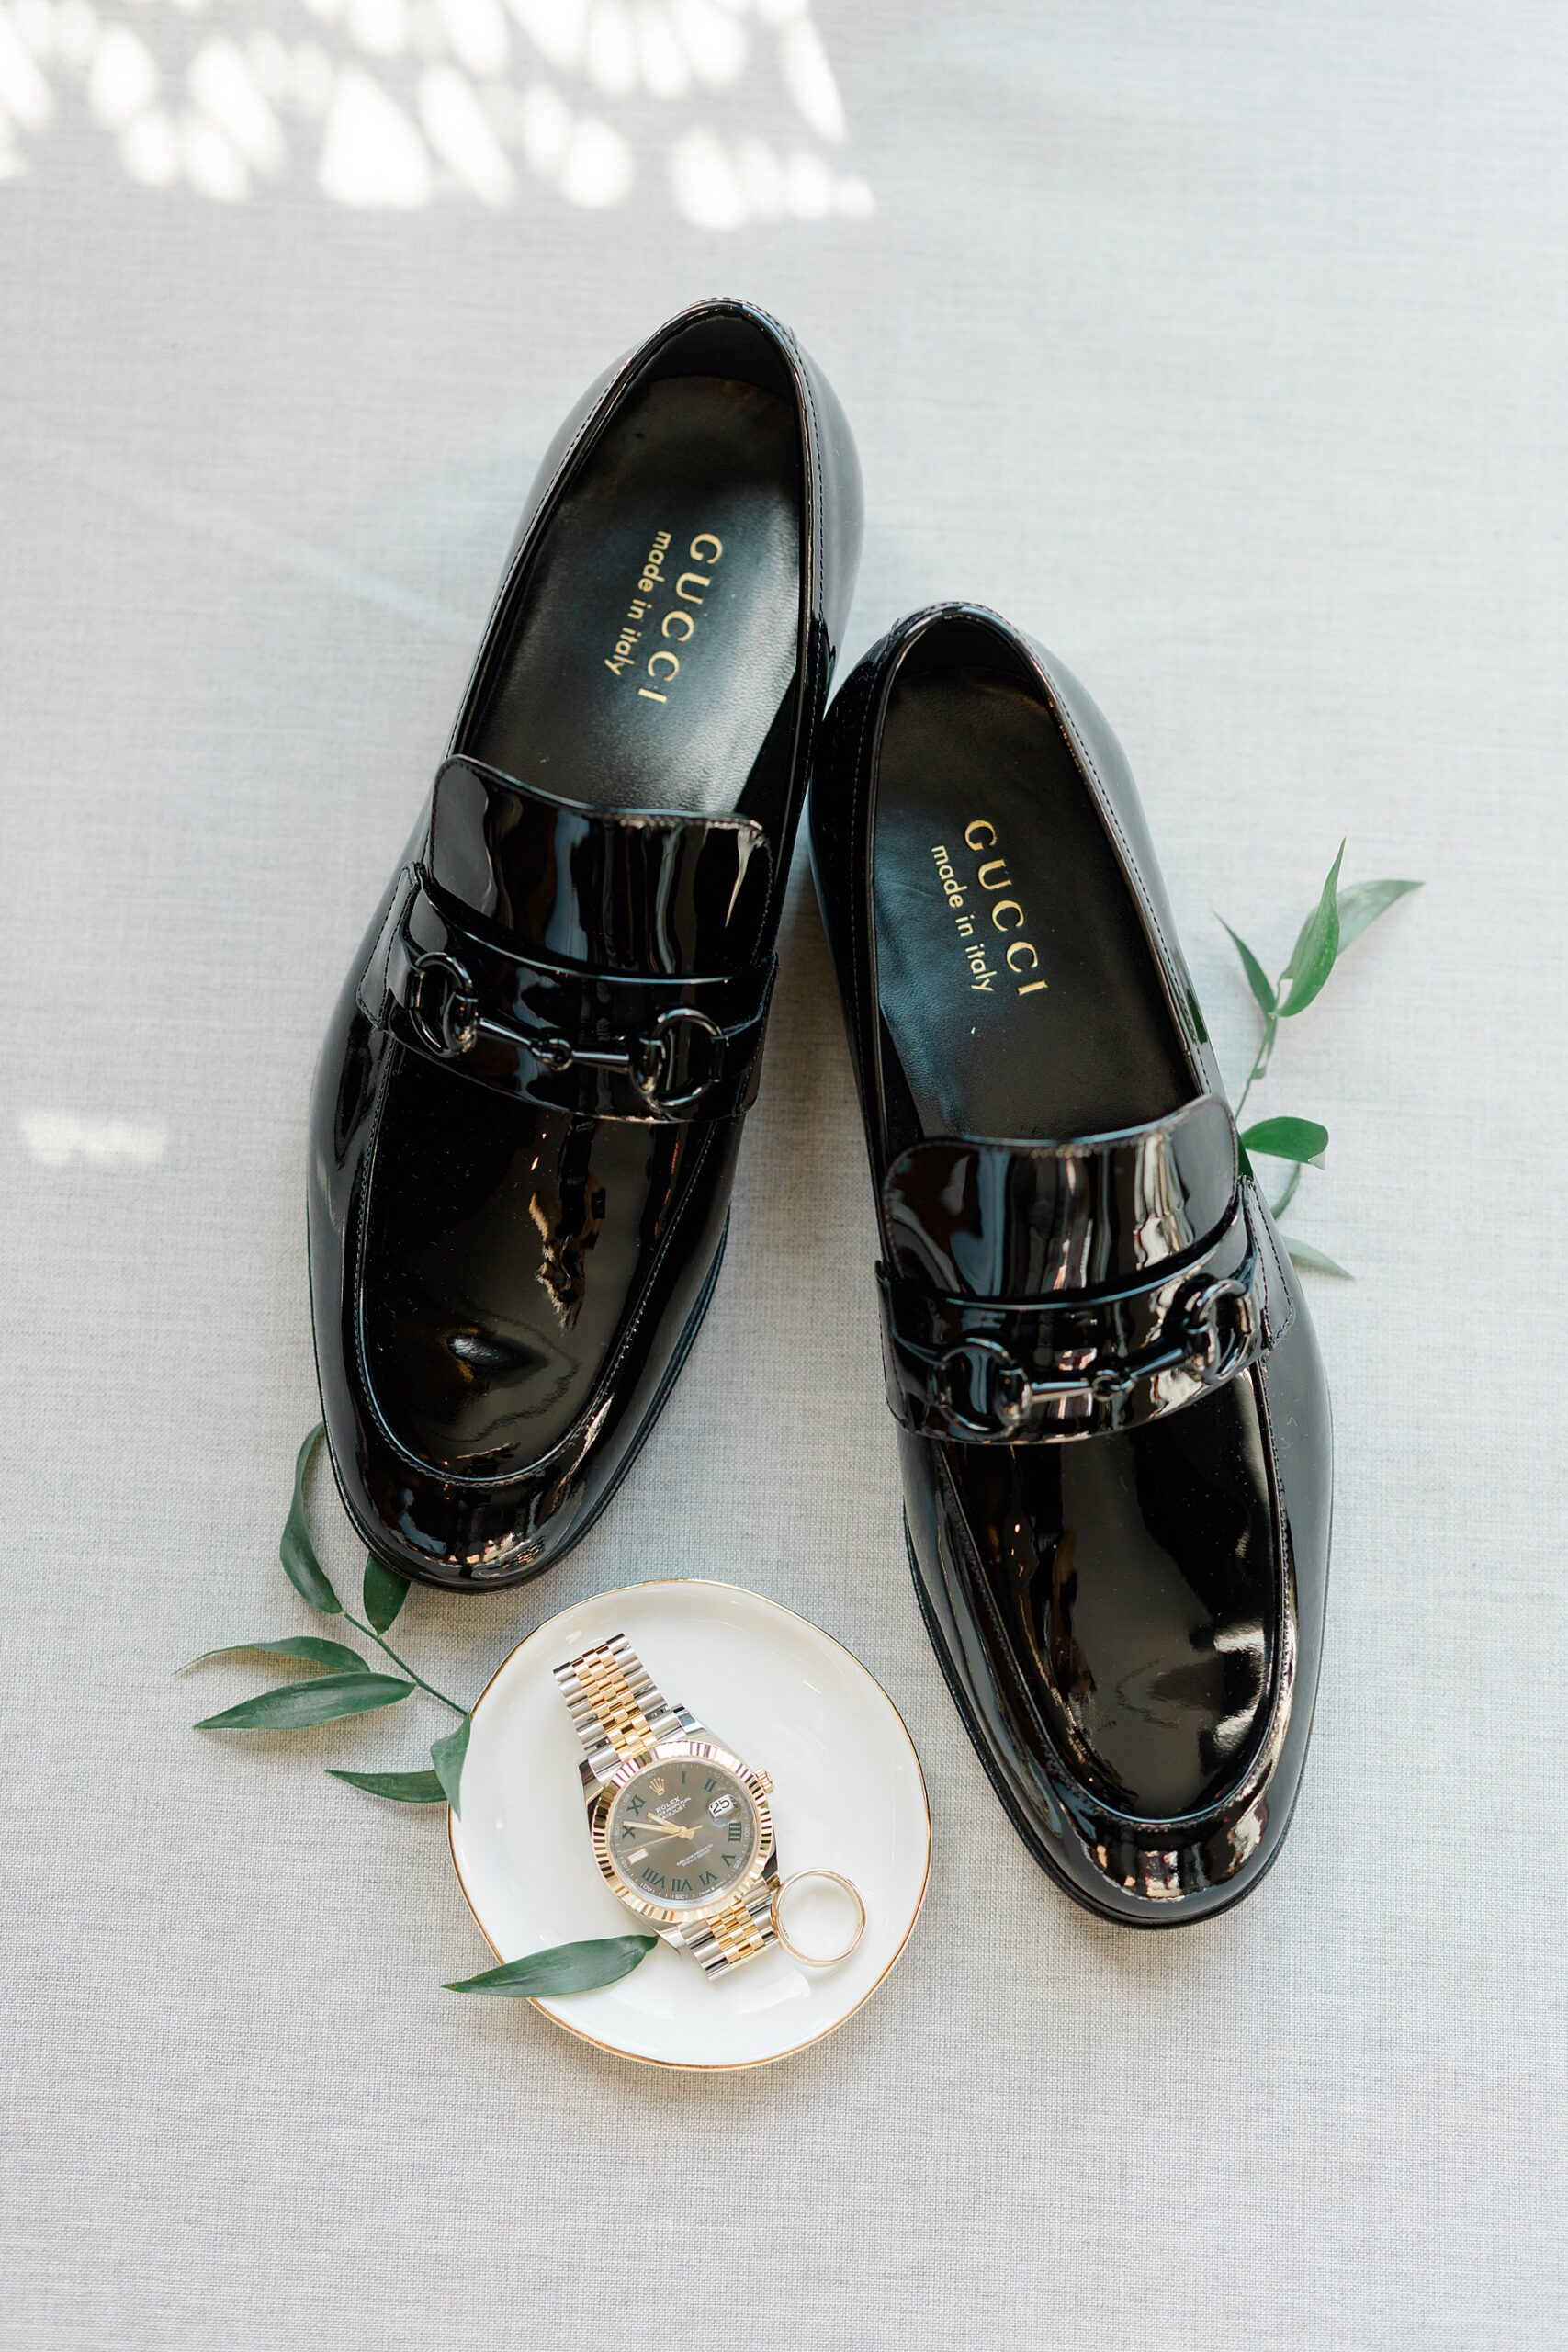 groom shoes and details